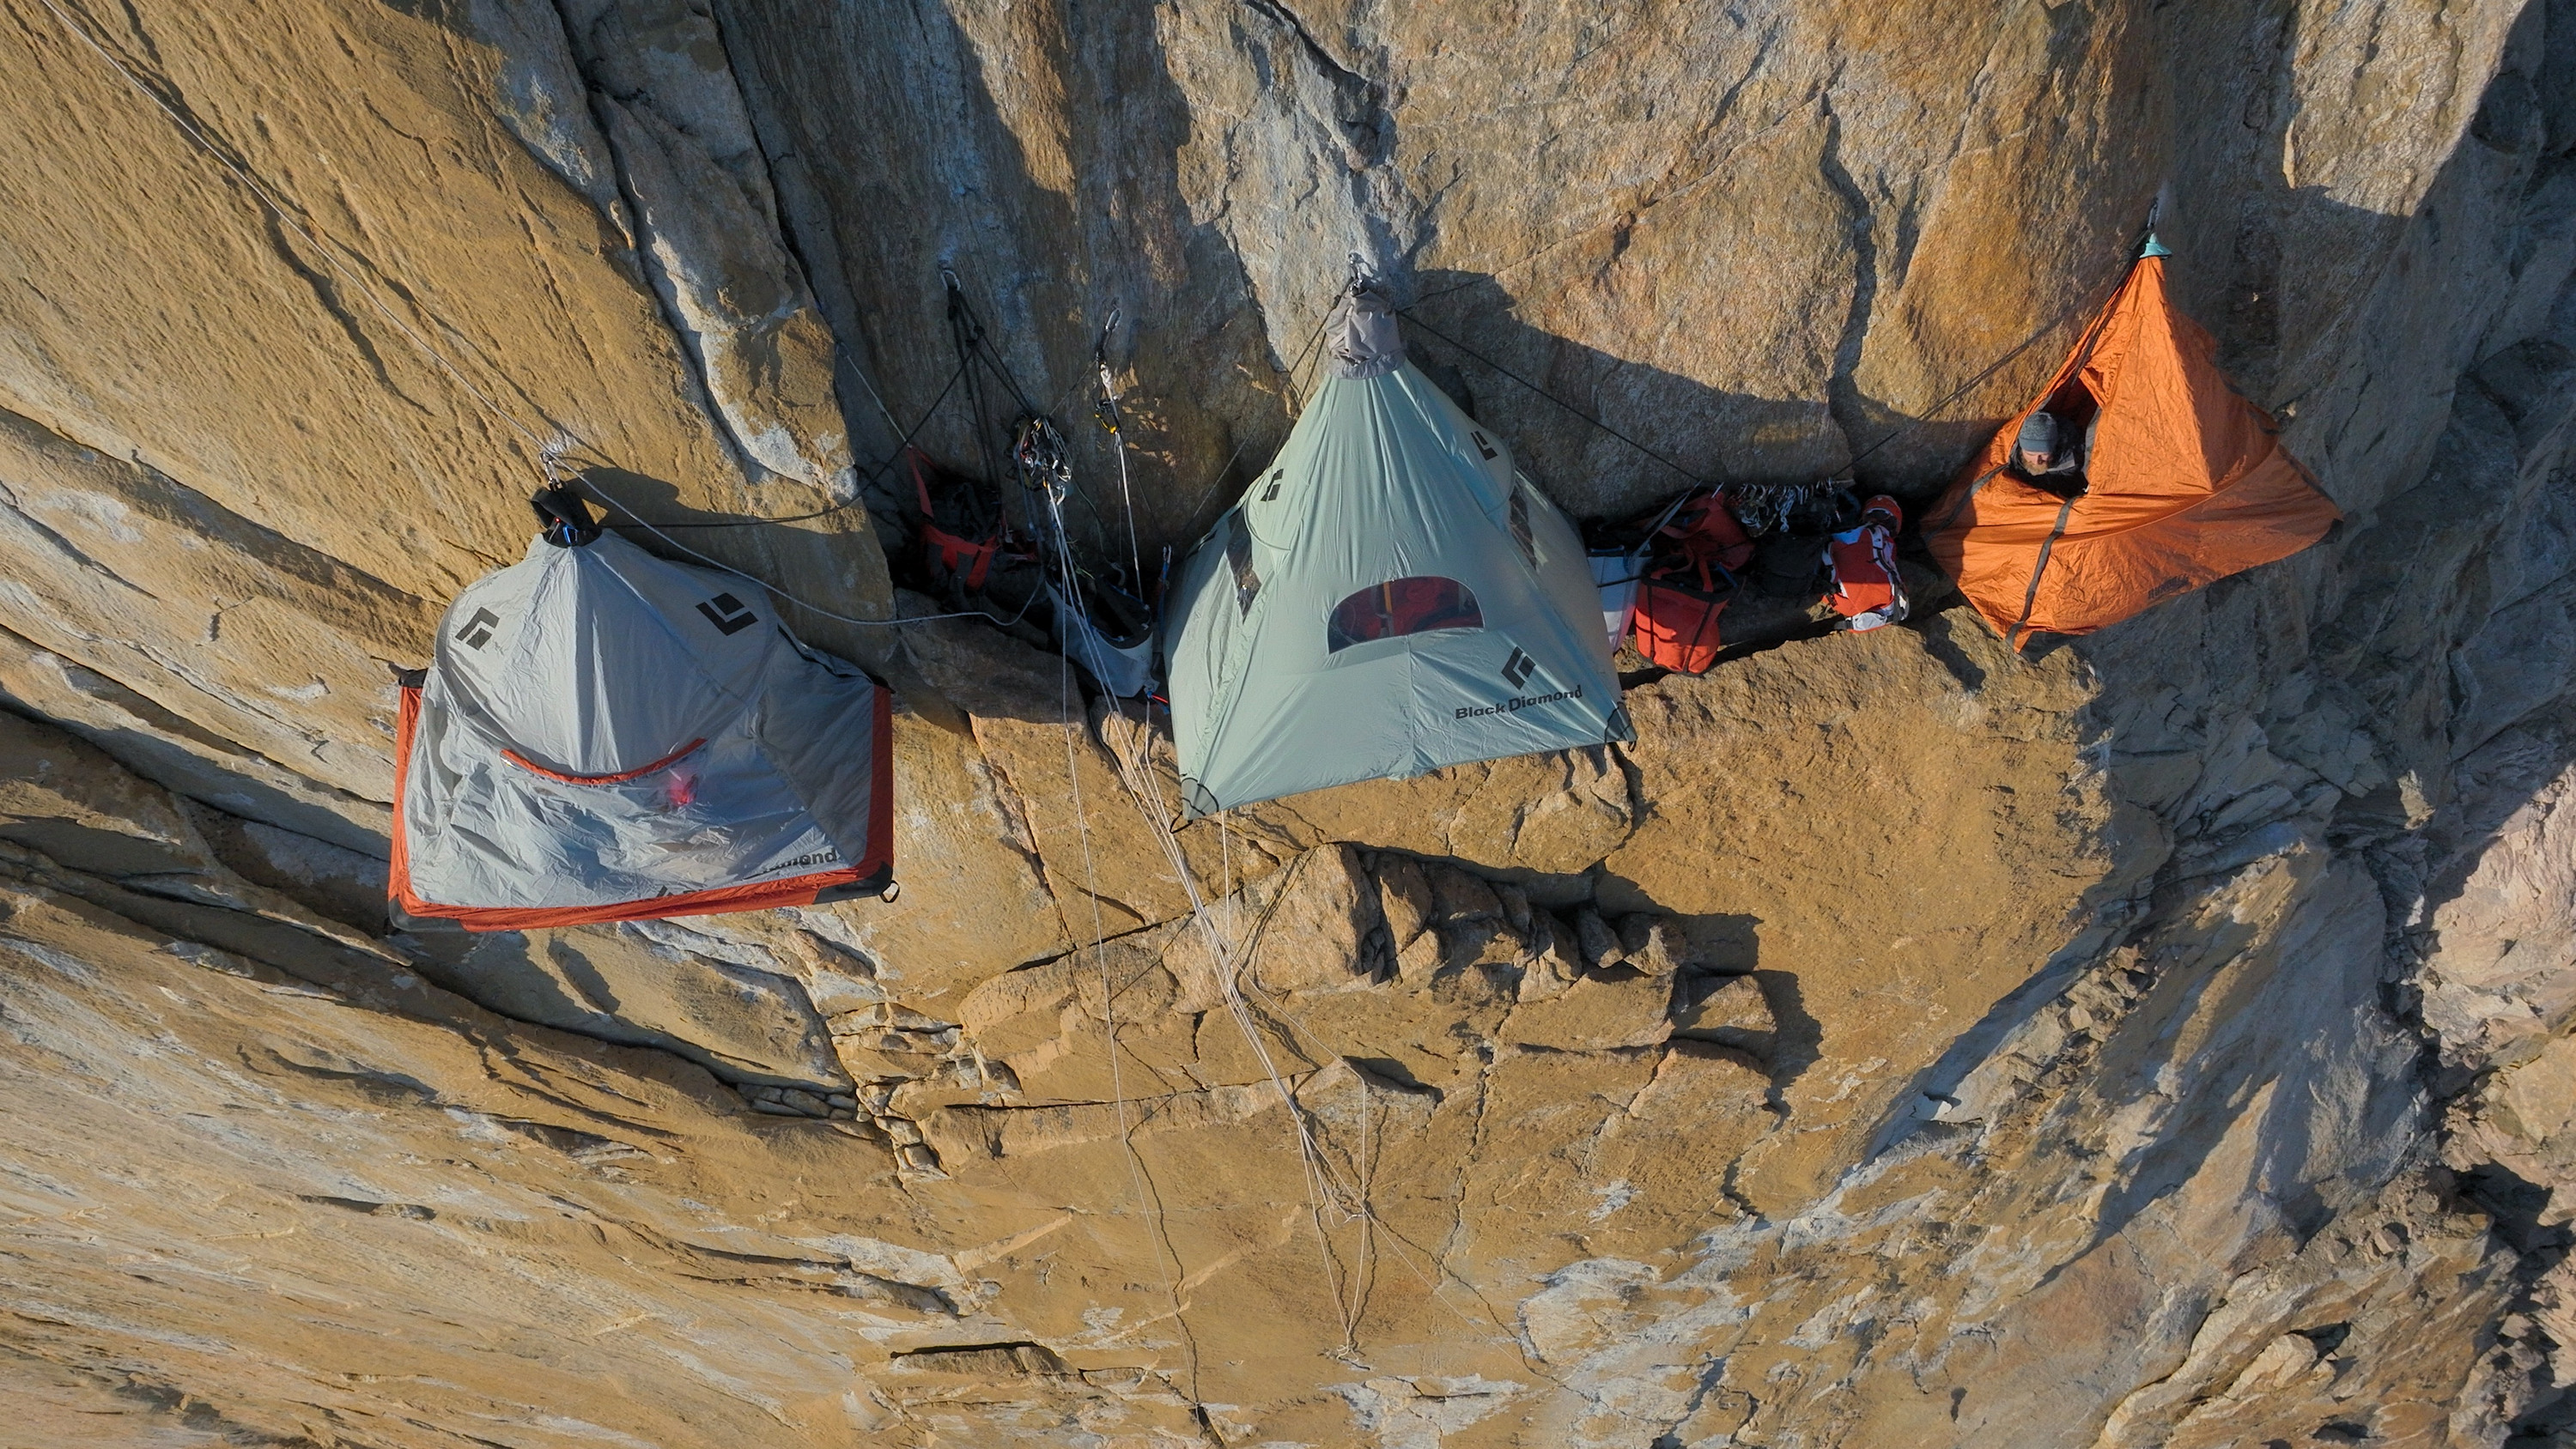 The team pitched their tents on the side of a sheer cliff face in the latest climb